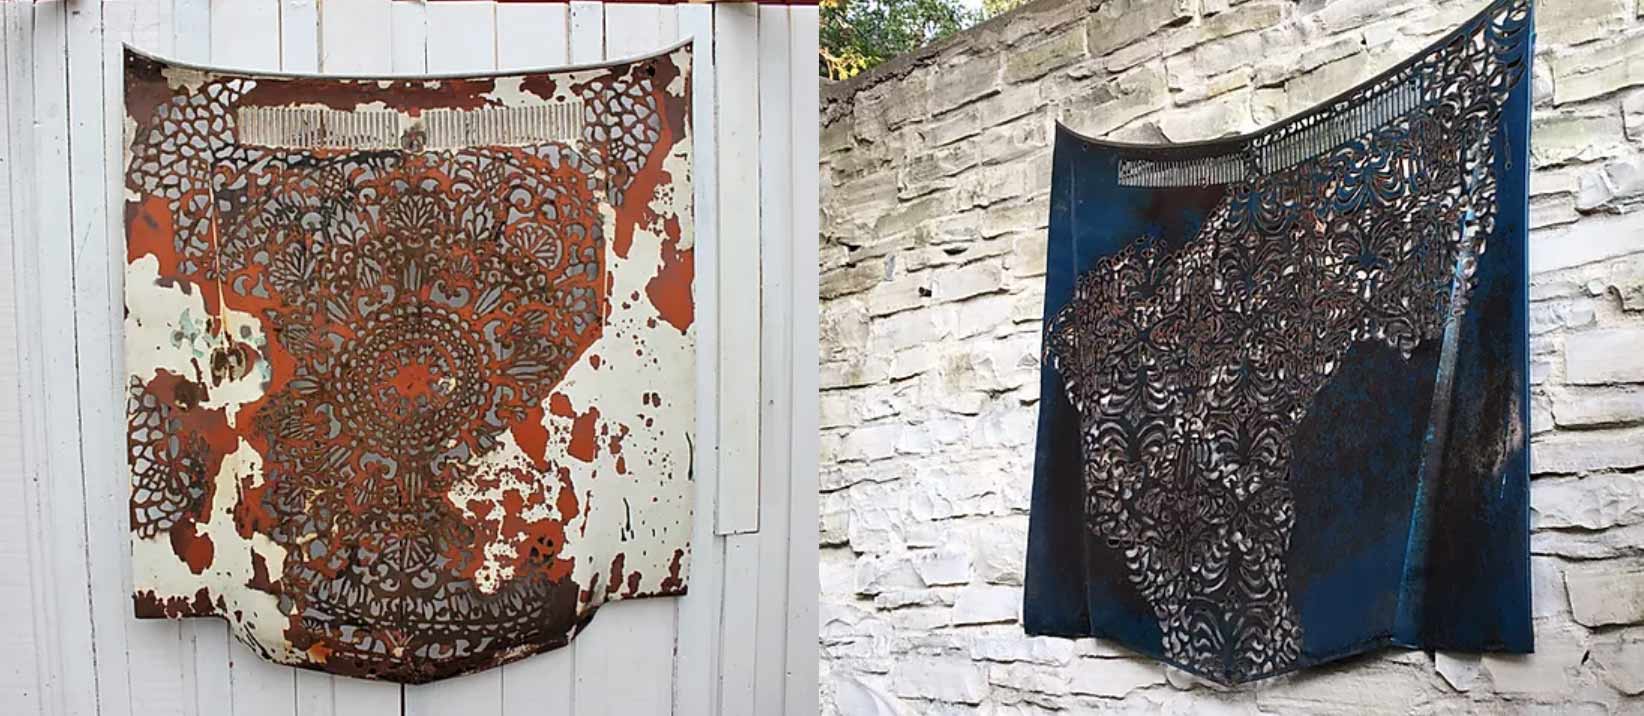 Pieces of metal taken from old cars, like a hood or a door, with intricate patterns carved out of them, and a mix of paint and rust for the finish.